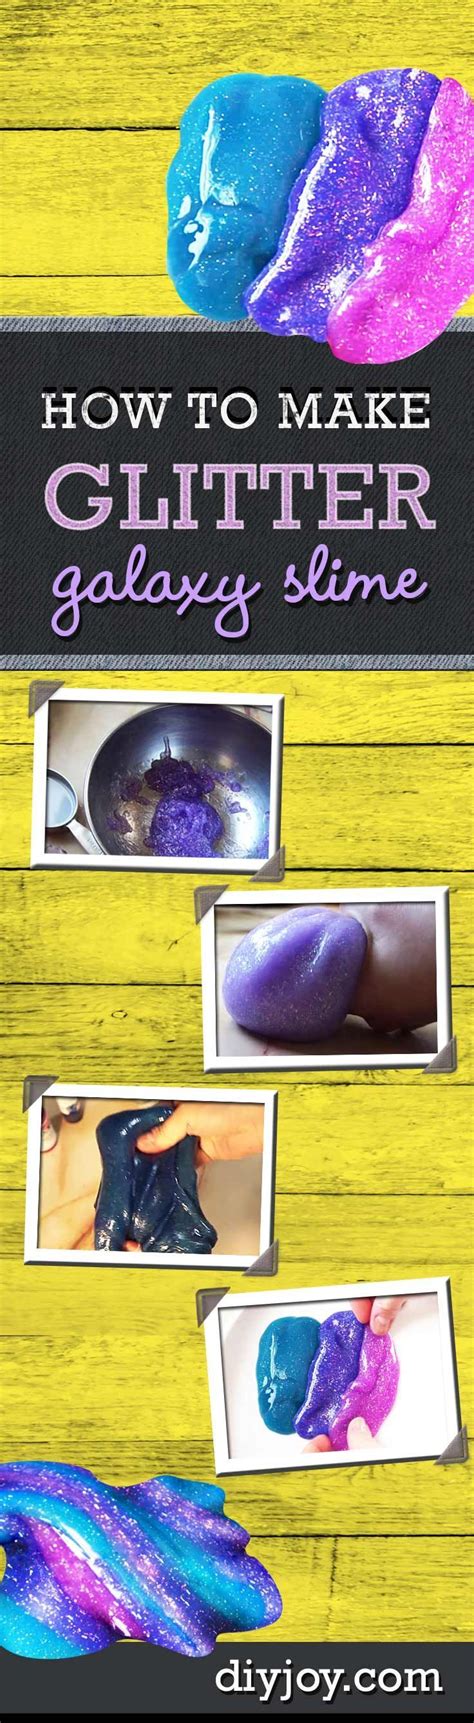 Fun Crafts For Kids To Make At Home Diy Galaxy Slime Recipe And